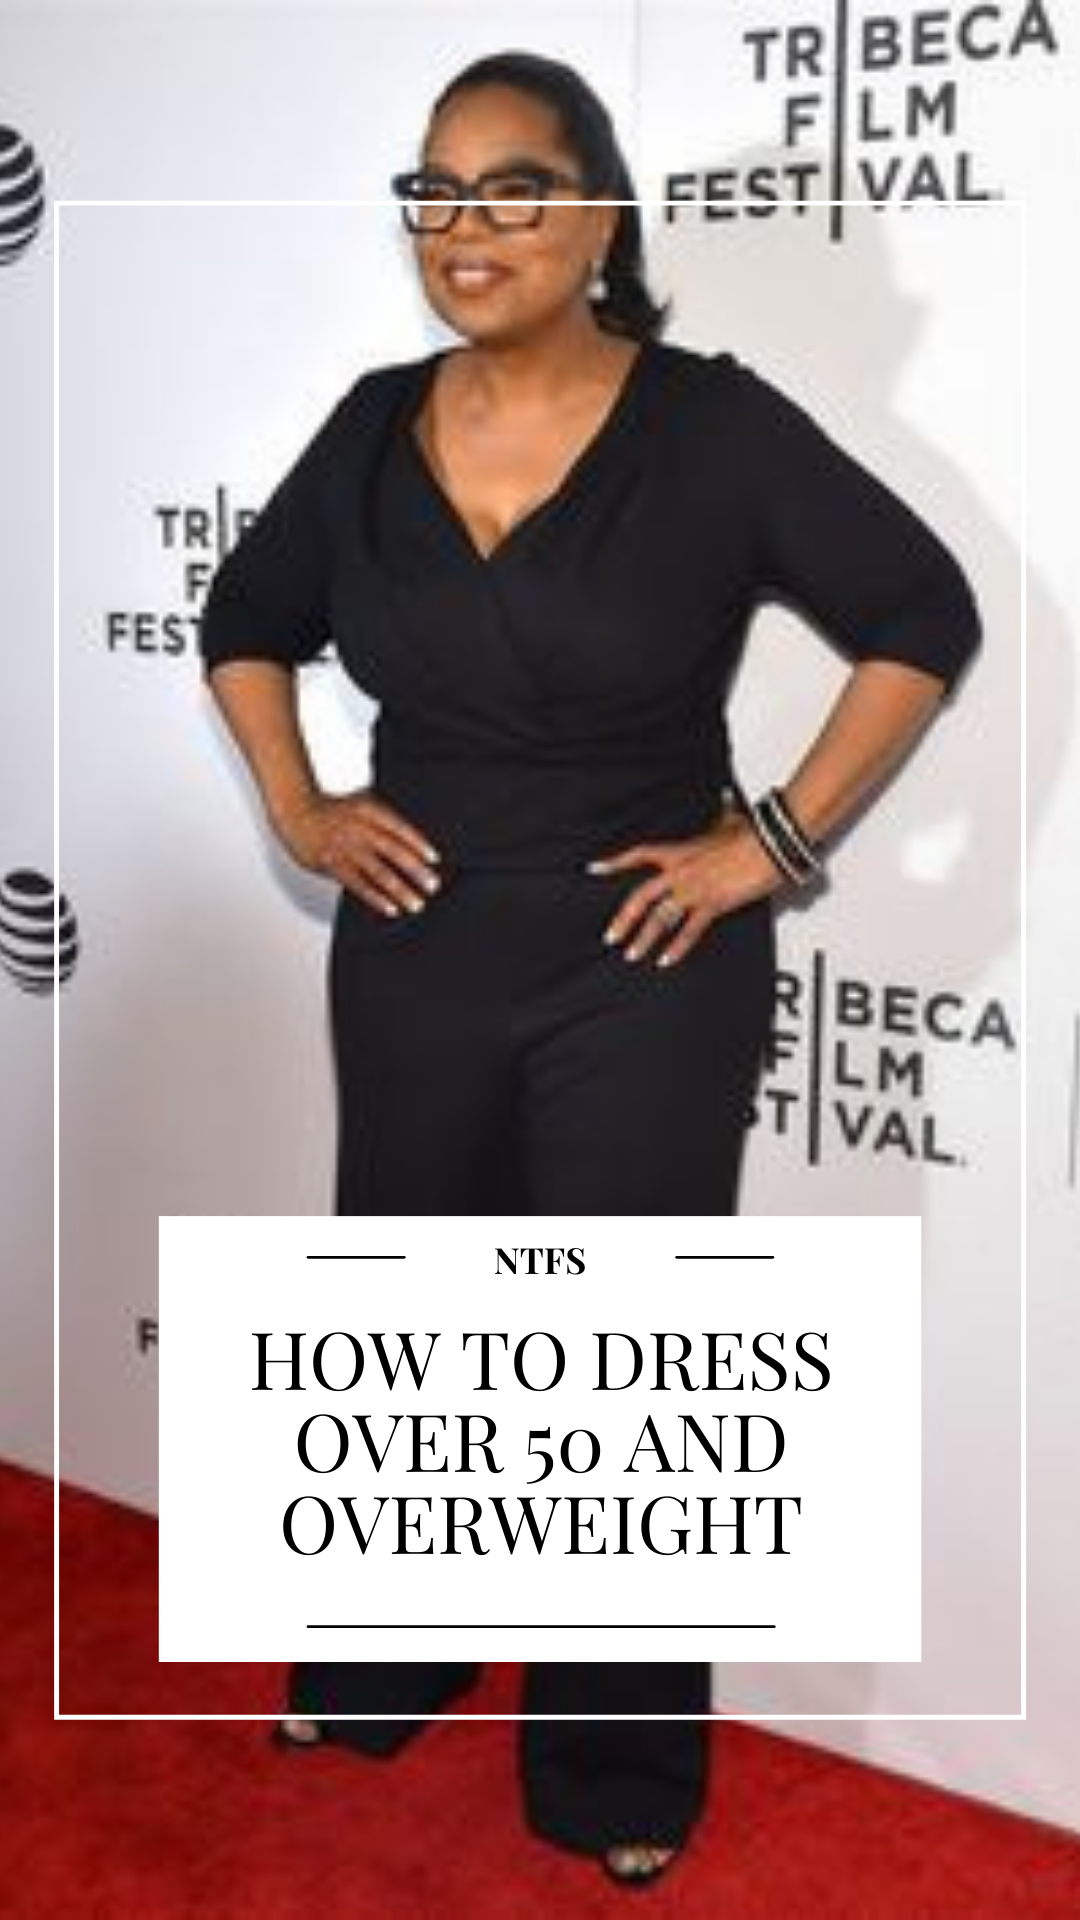 How to Dress Over 50 and Overweight